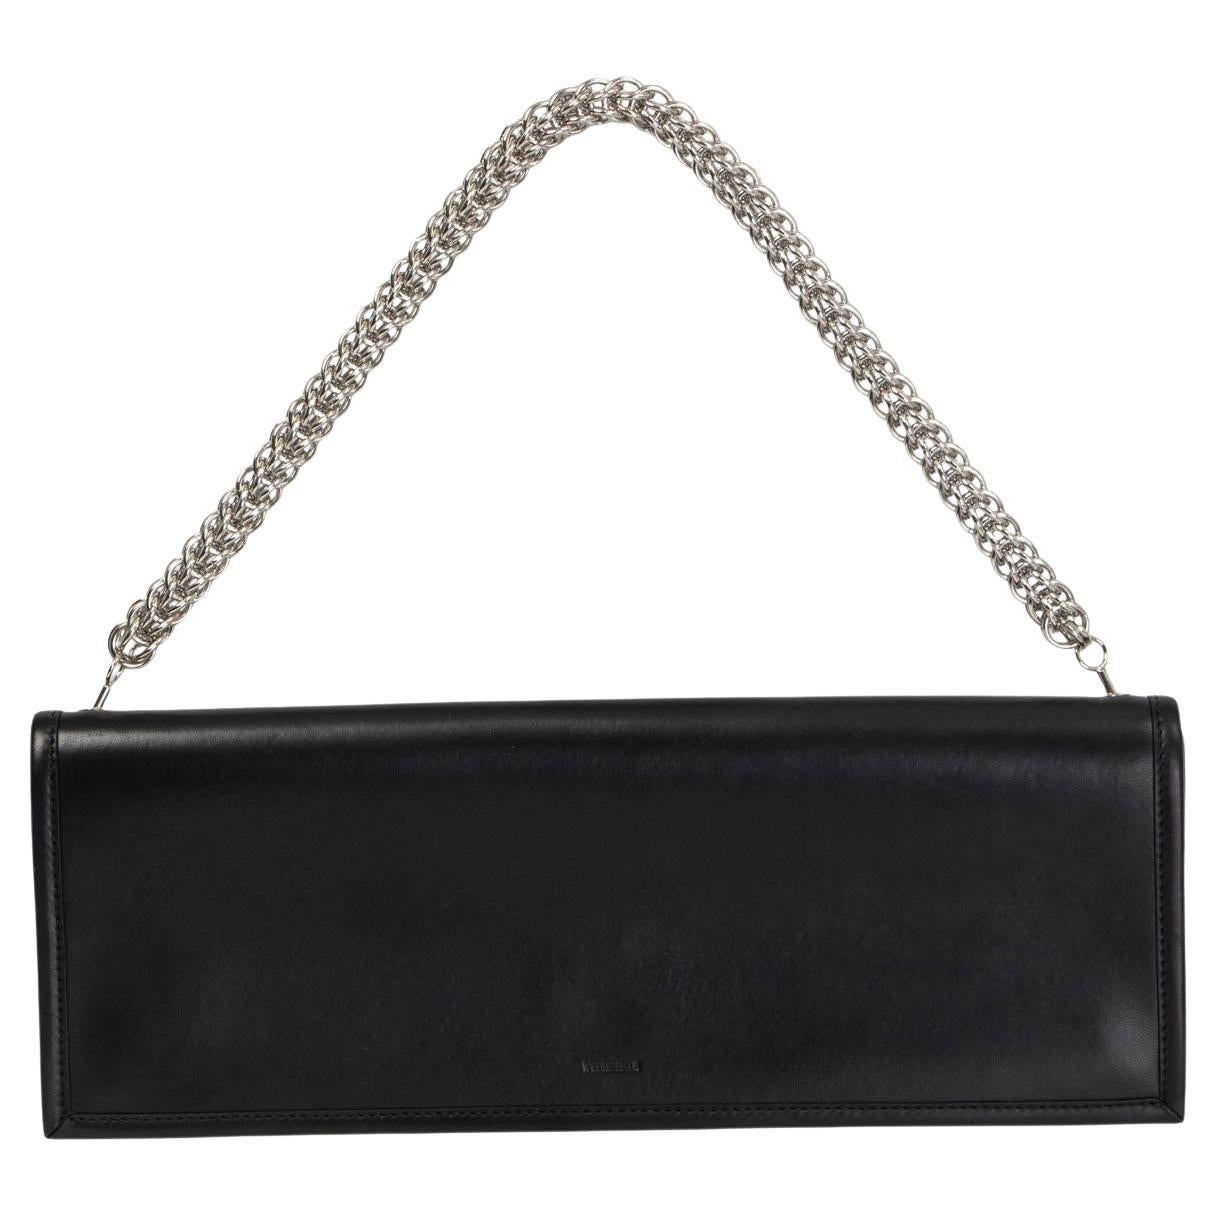 VETEMENTS black leather CHAIN Clutch Bag For Sale